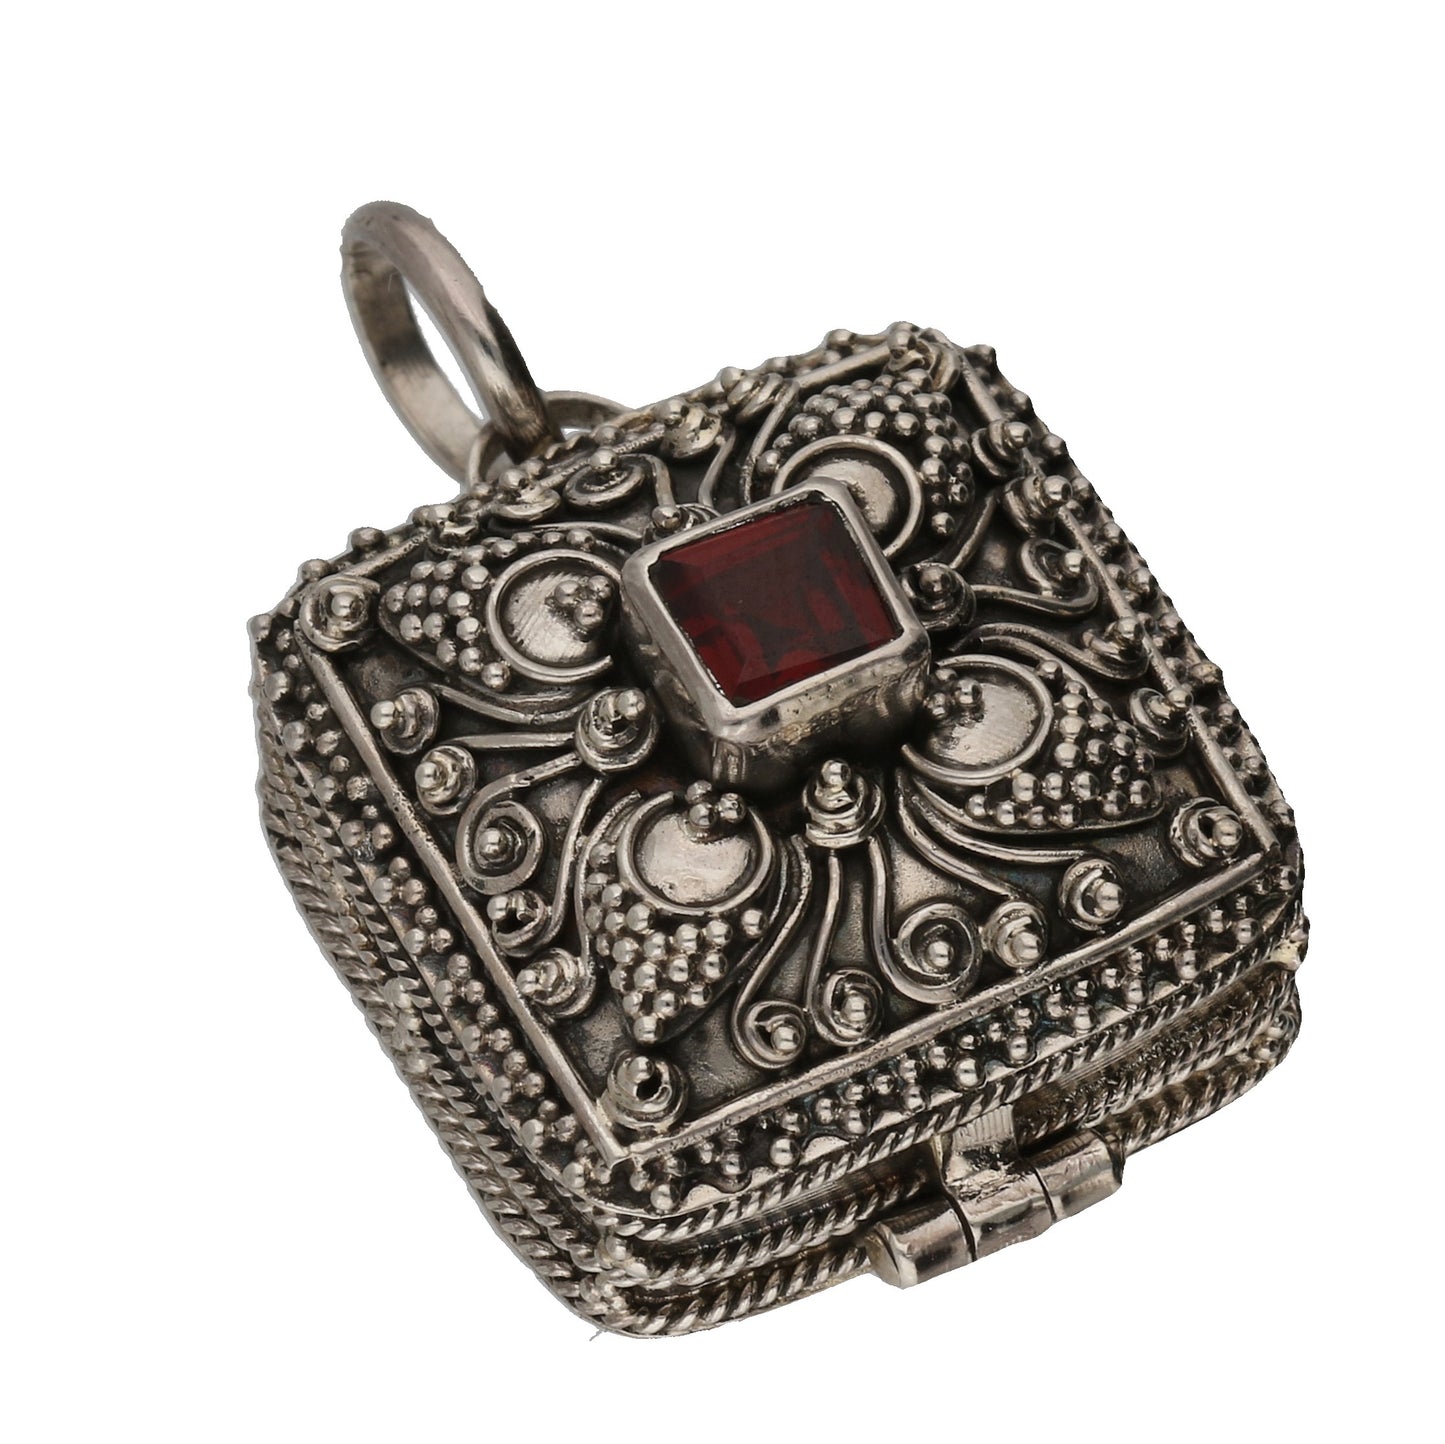 Garnet and Sterling Silver Square Poison Box Locket Pendant